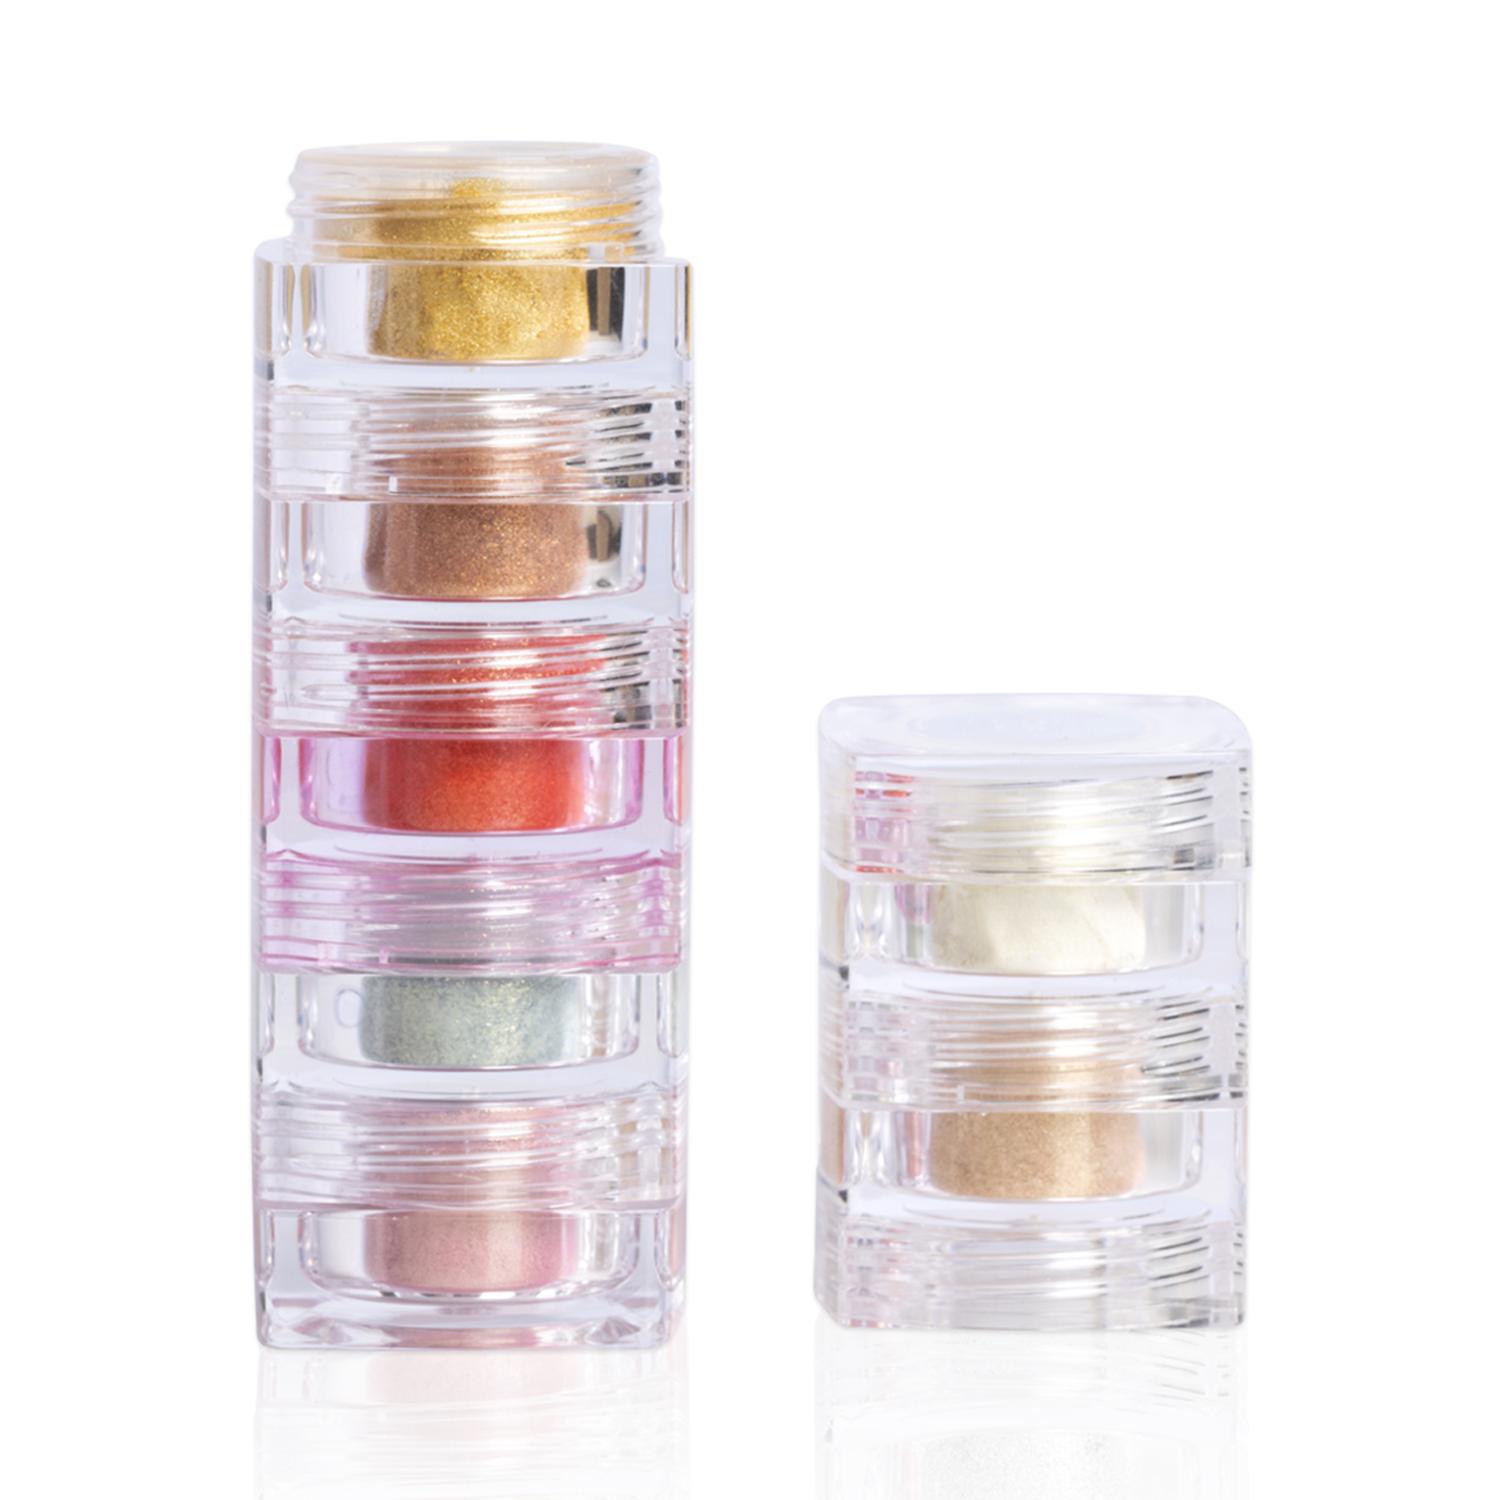 PAC 7-In-1 Pigment Tower - 02 Shade (2.5g)